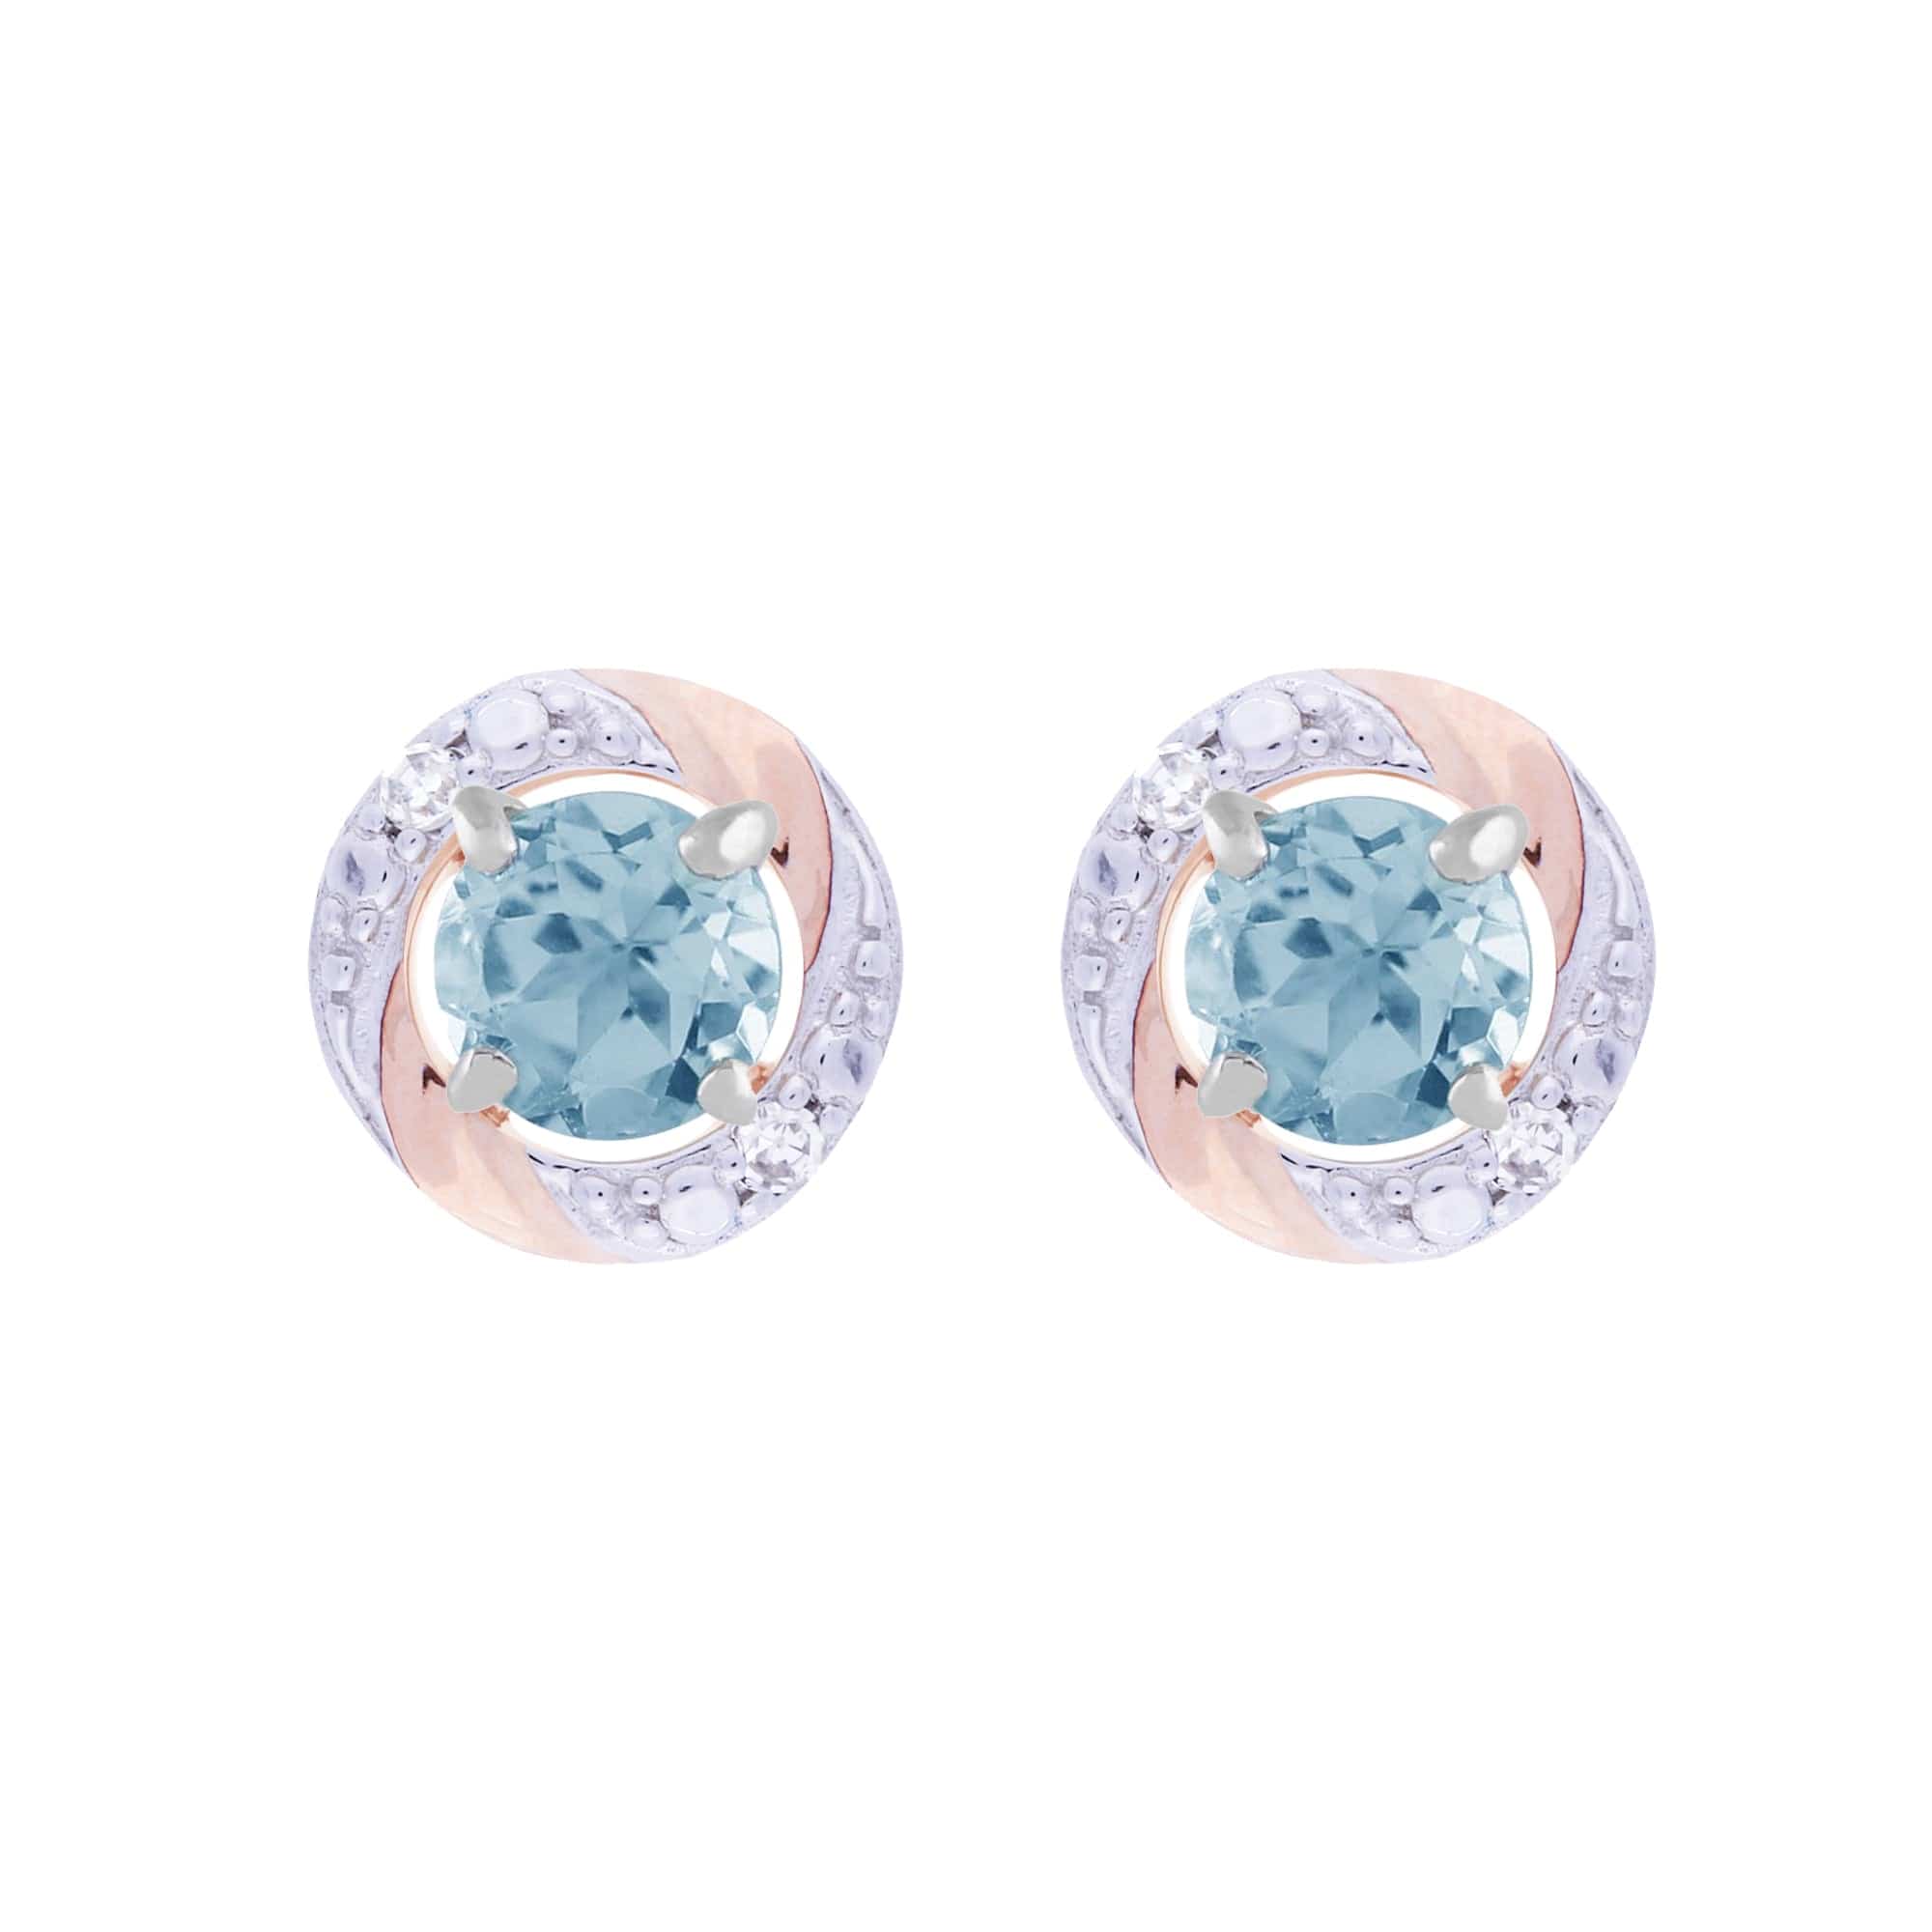 11623-191E0378019 Classic Round Blue Topaz Stud Earrings with Detachable Diamond Round Earrings Jacket Set in 9ct White Gold 1